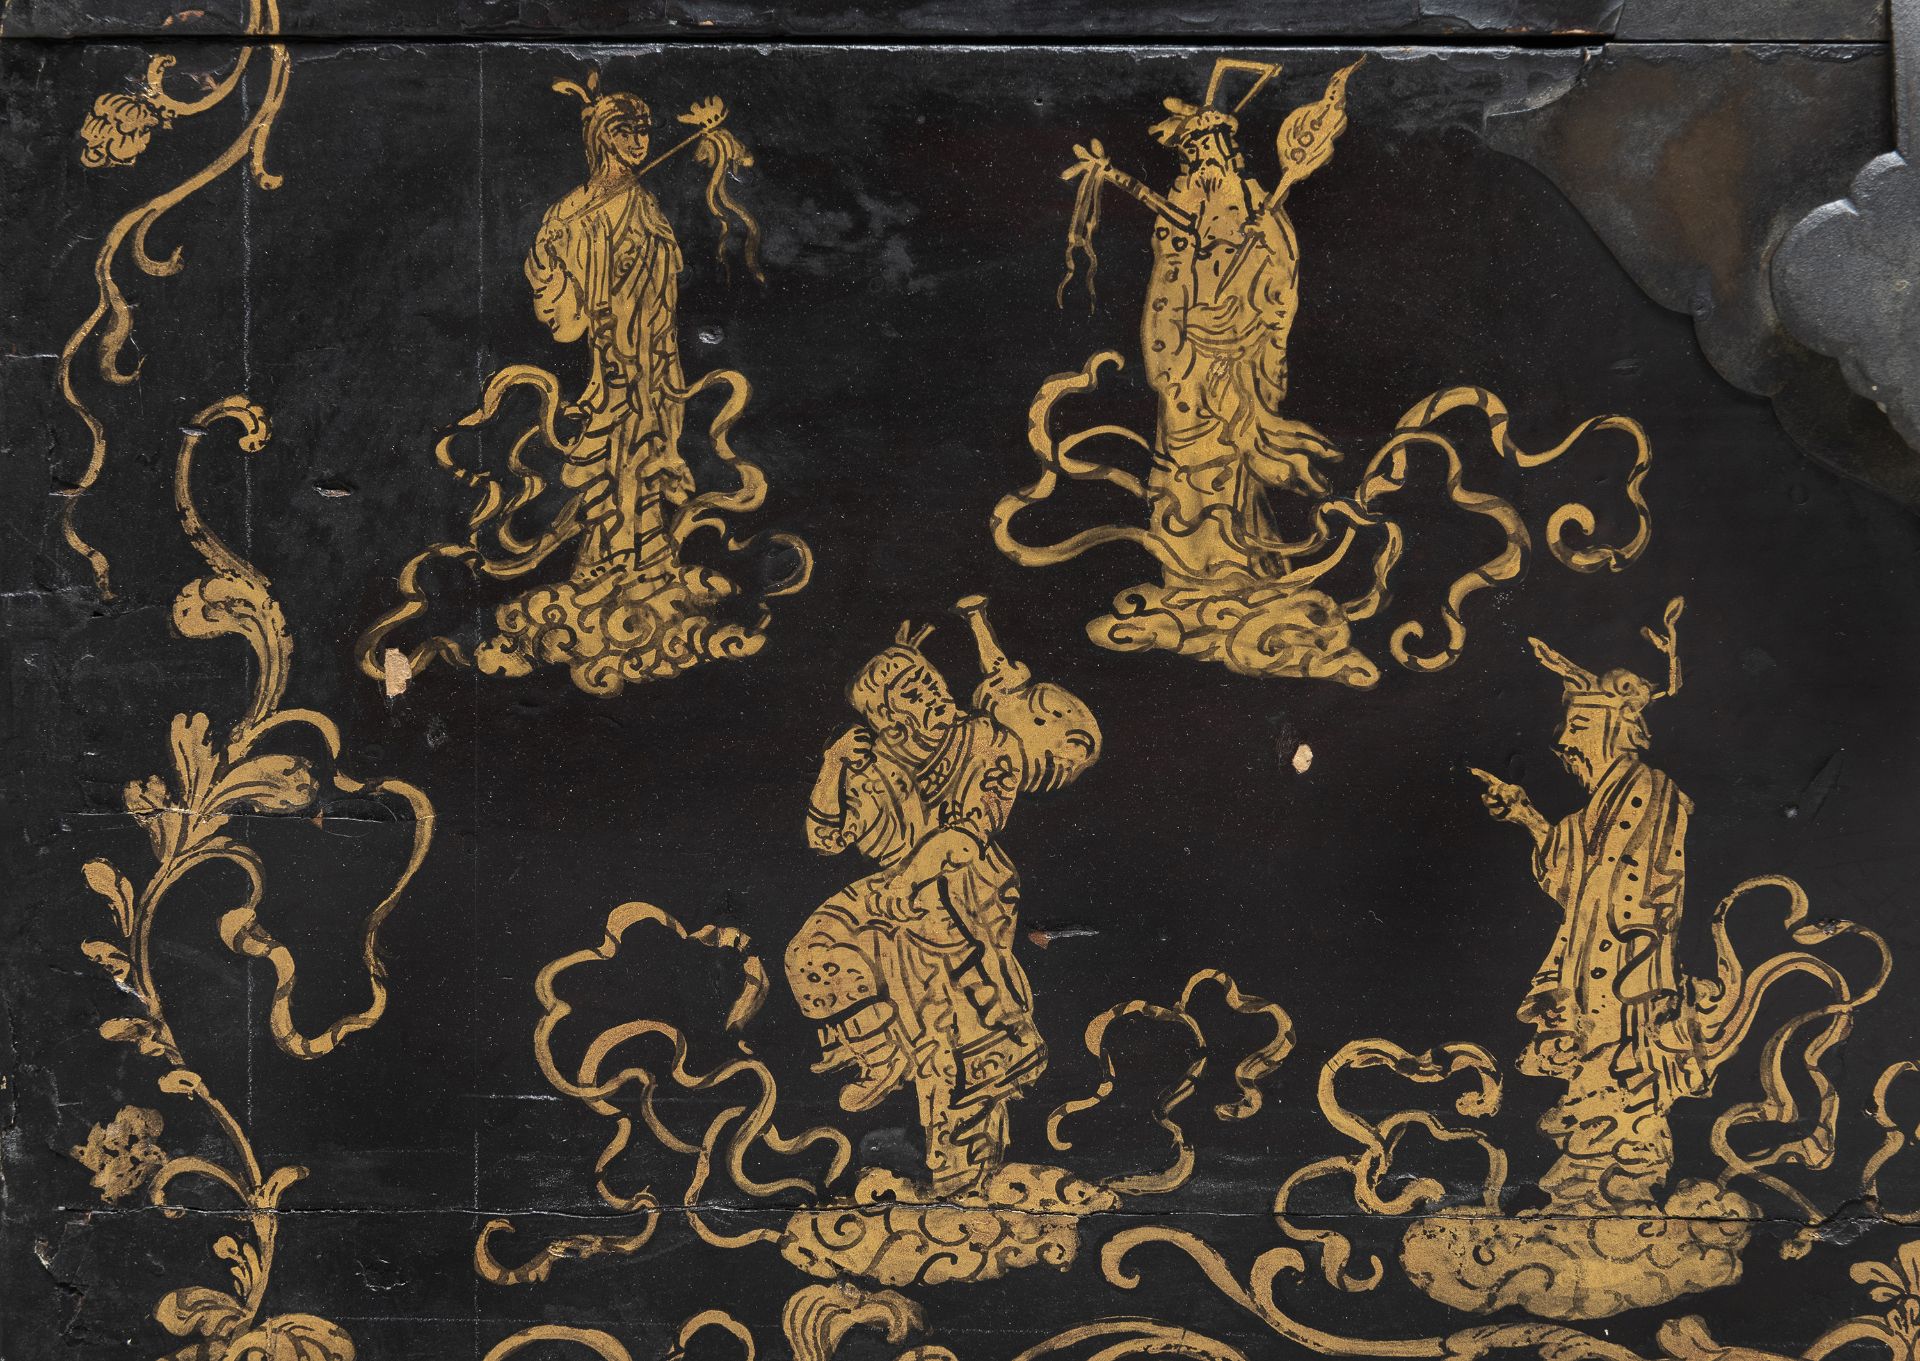 A SMALL CHINESE BLACK LAQUER WOOD TRUNK. 19TH CENTURY. - Image 2 of 2